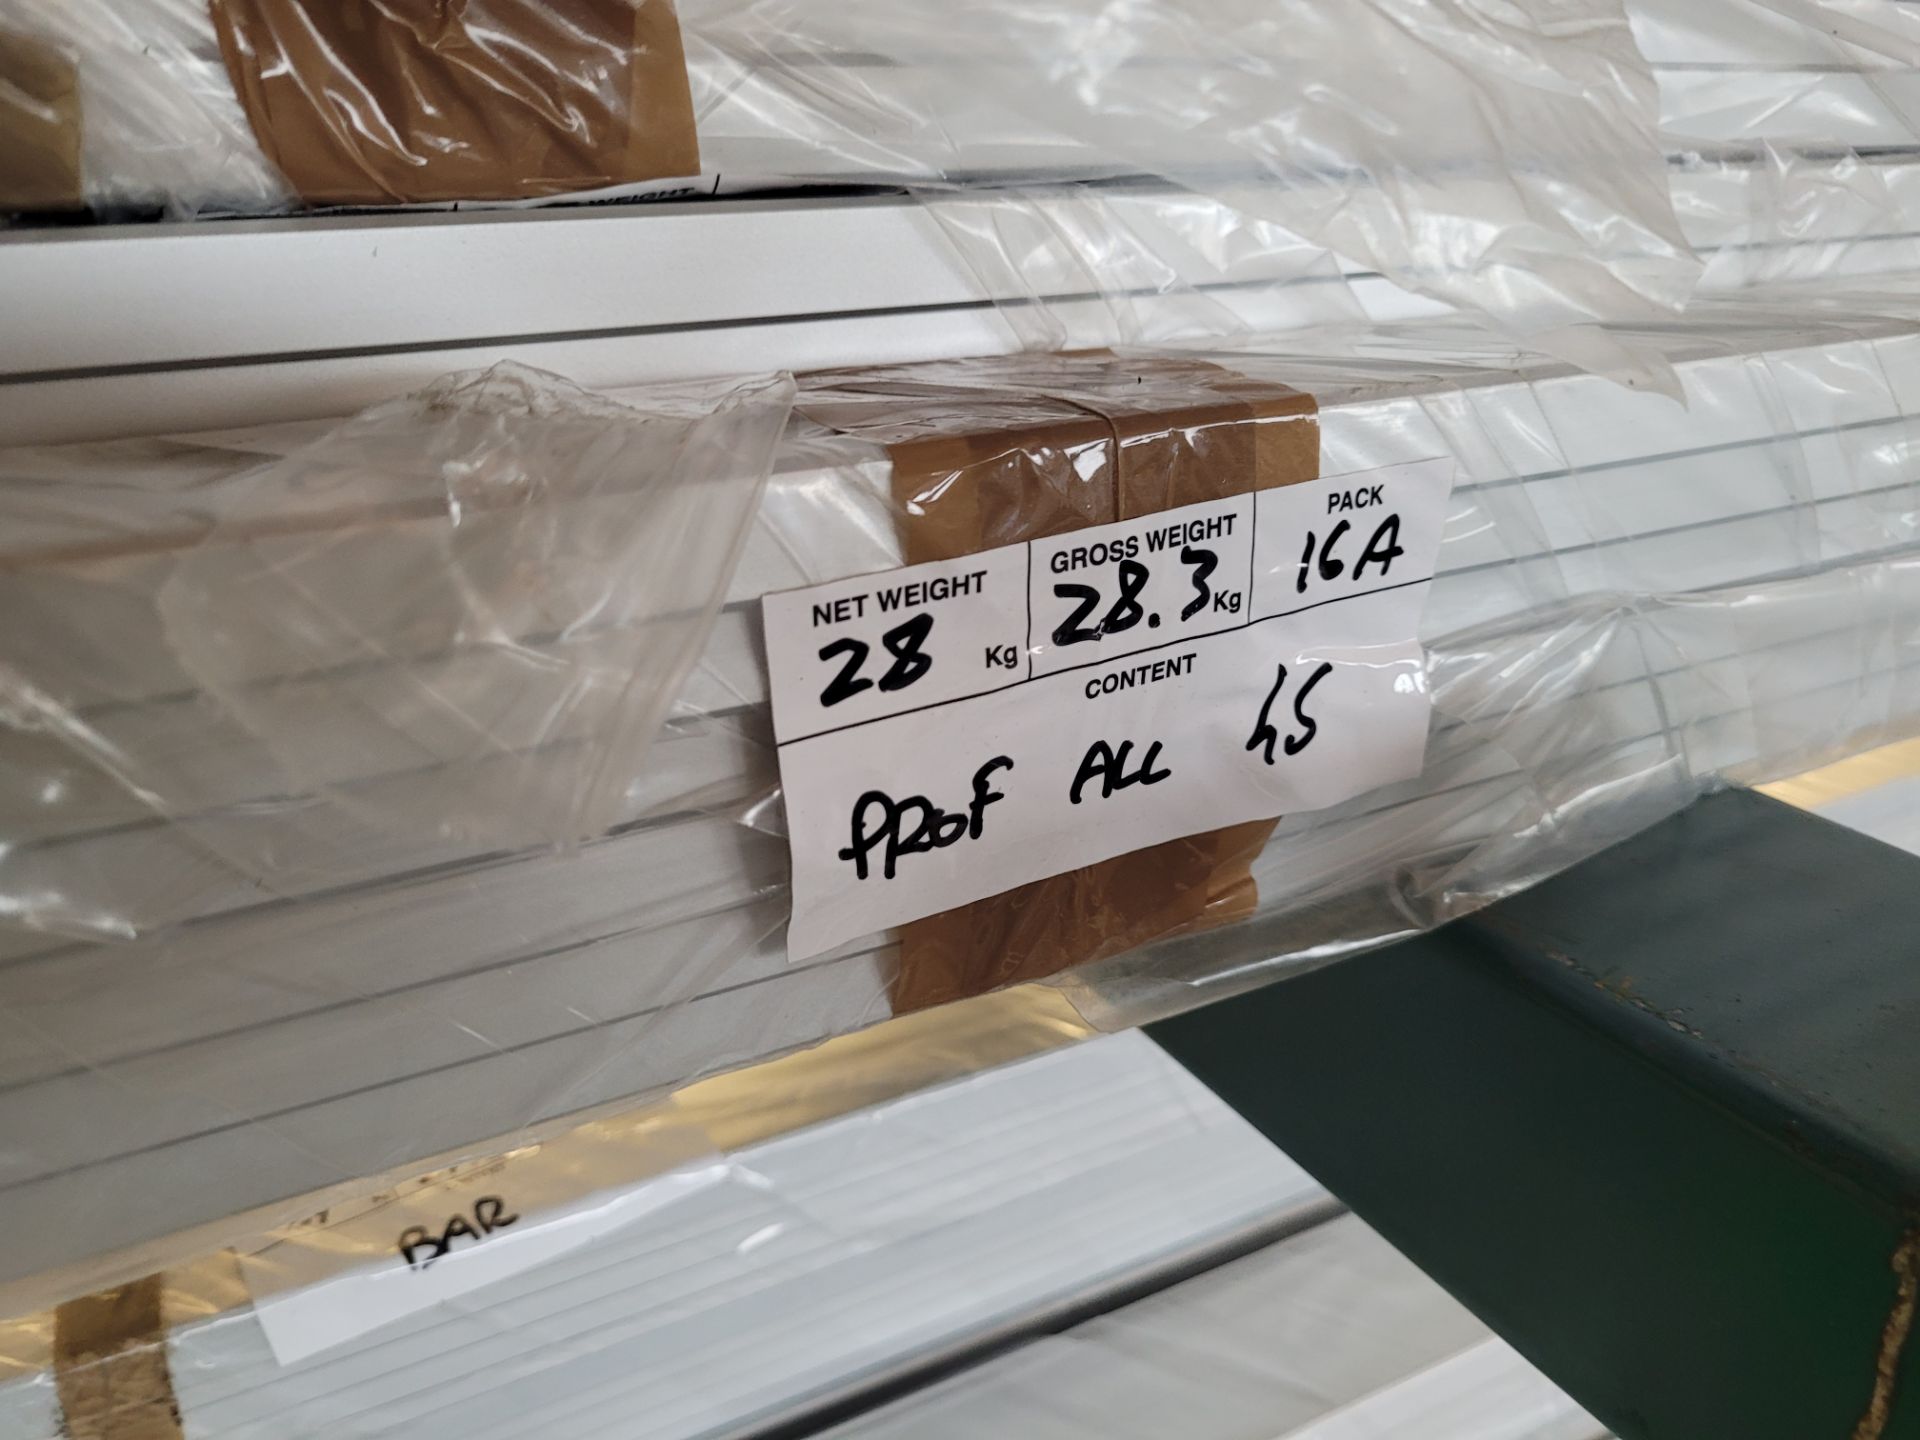 Lot of aluminum extrusions (18) packs of ~20' L bars w/ net weight of 28.44 KG/ea, ~500kg total weig - Image 4 of 4